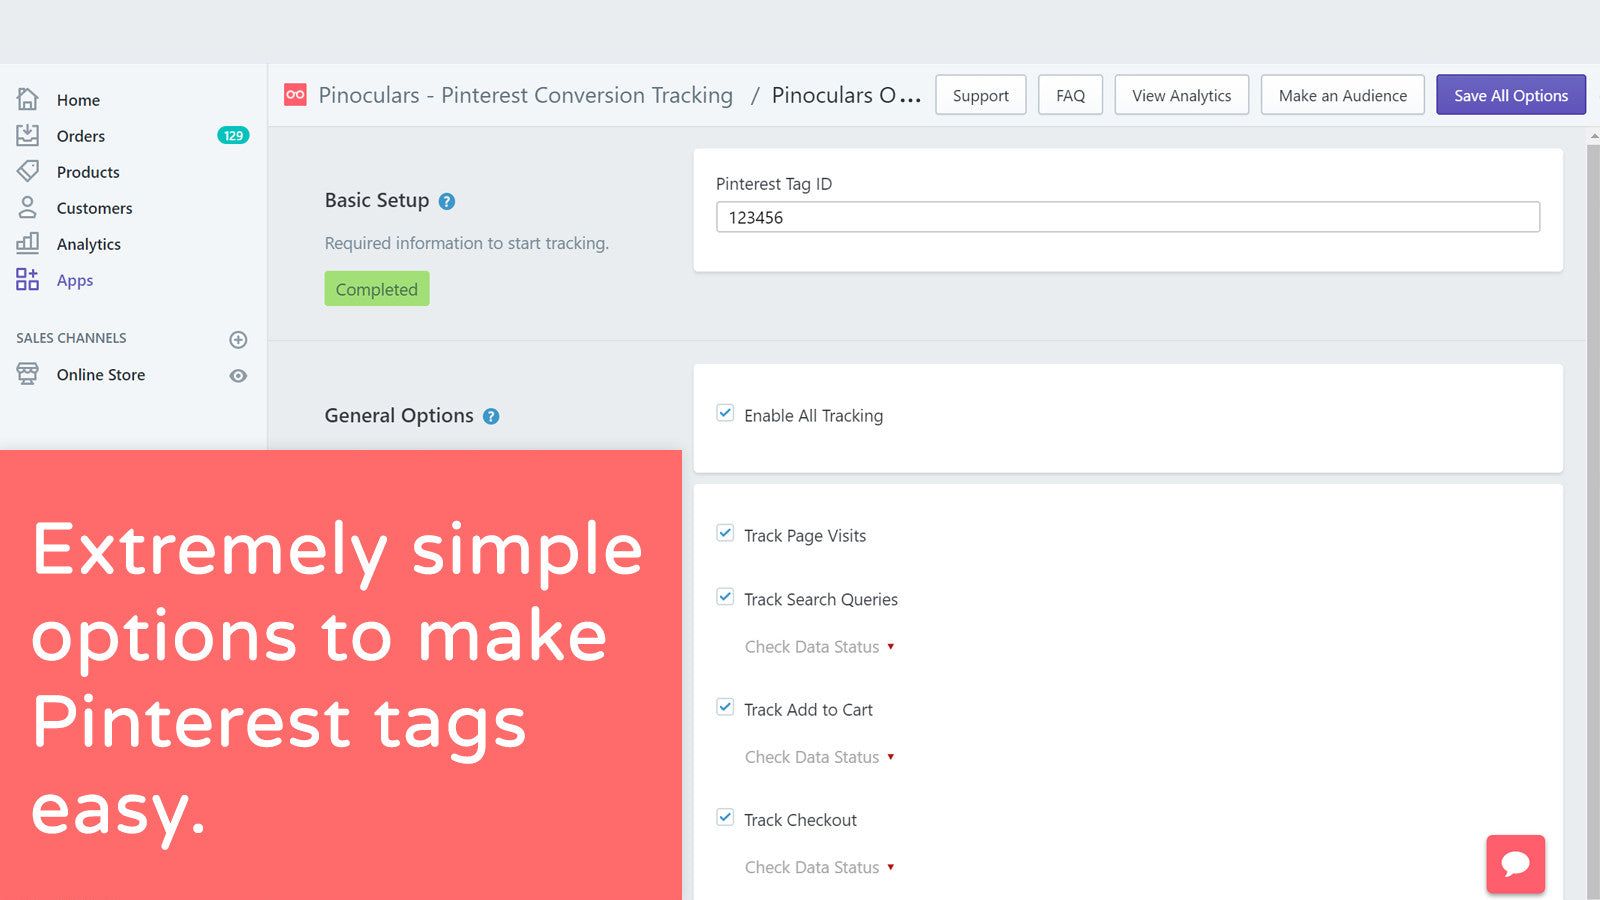 Extremely simple options that makes Pinterest tags easy